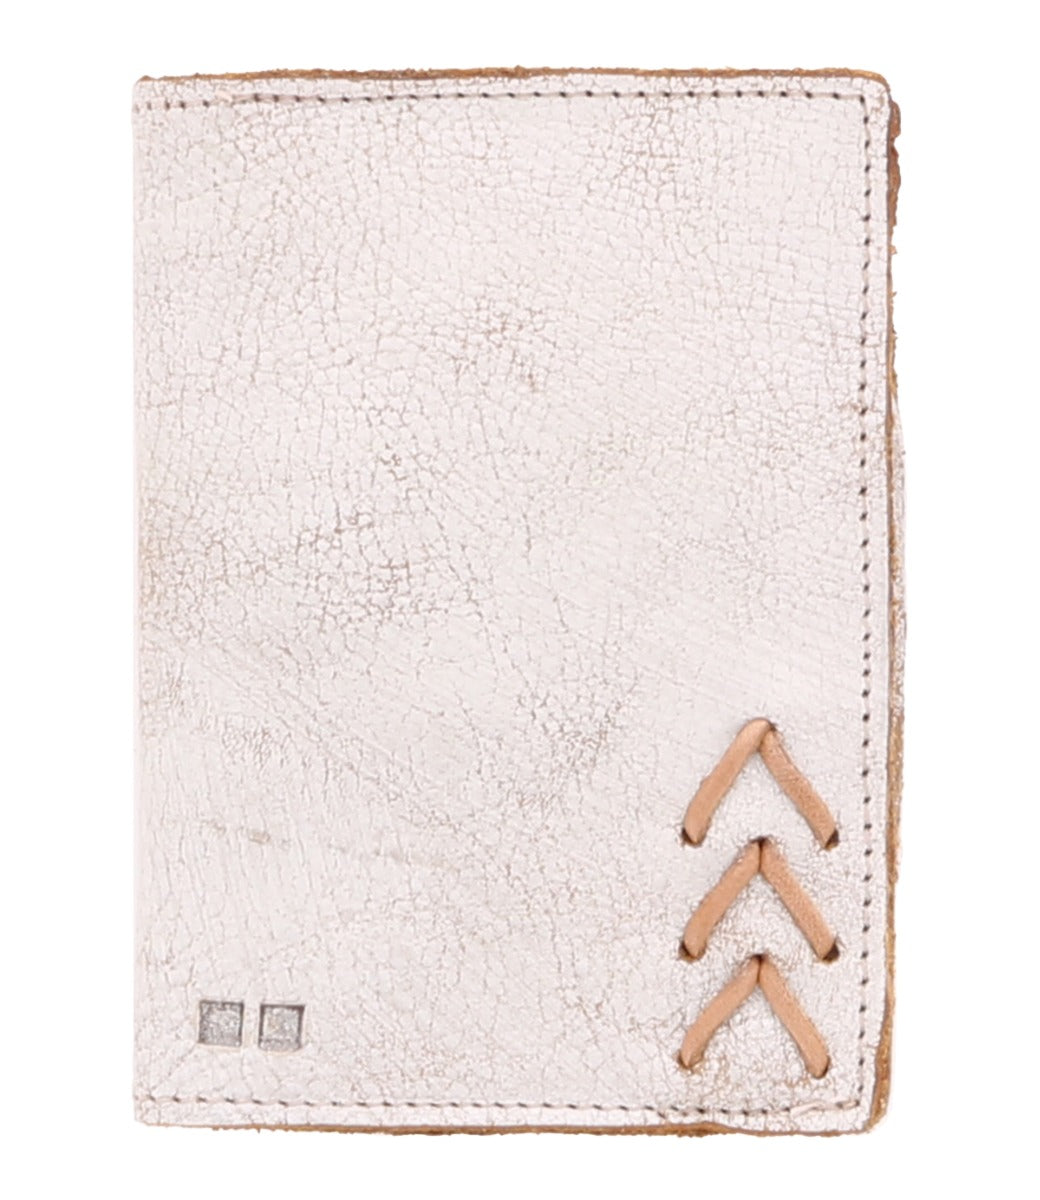 A white leather Stardust wallet with an arrow on it by Bed Stu.